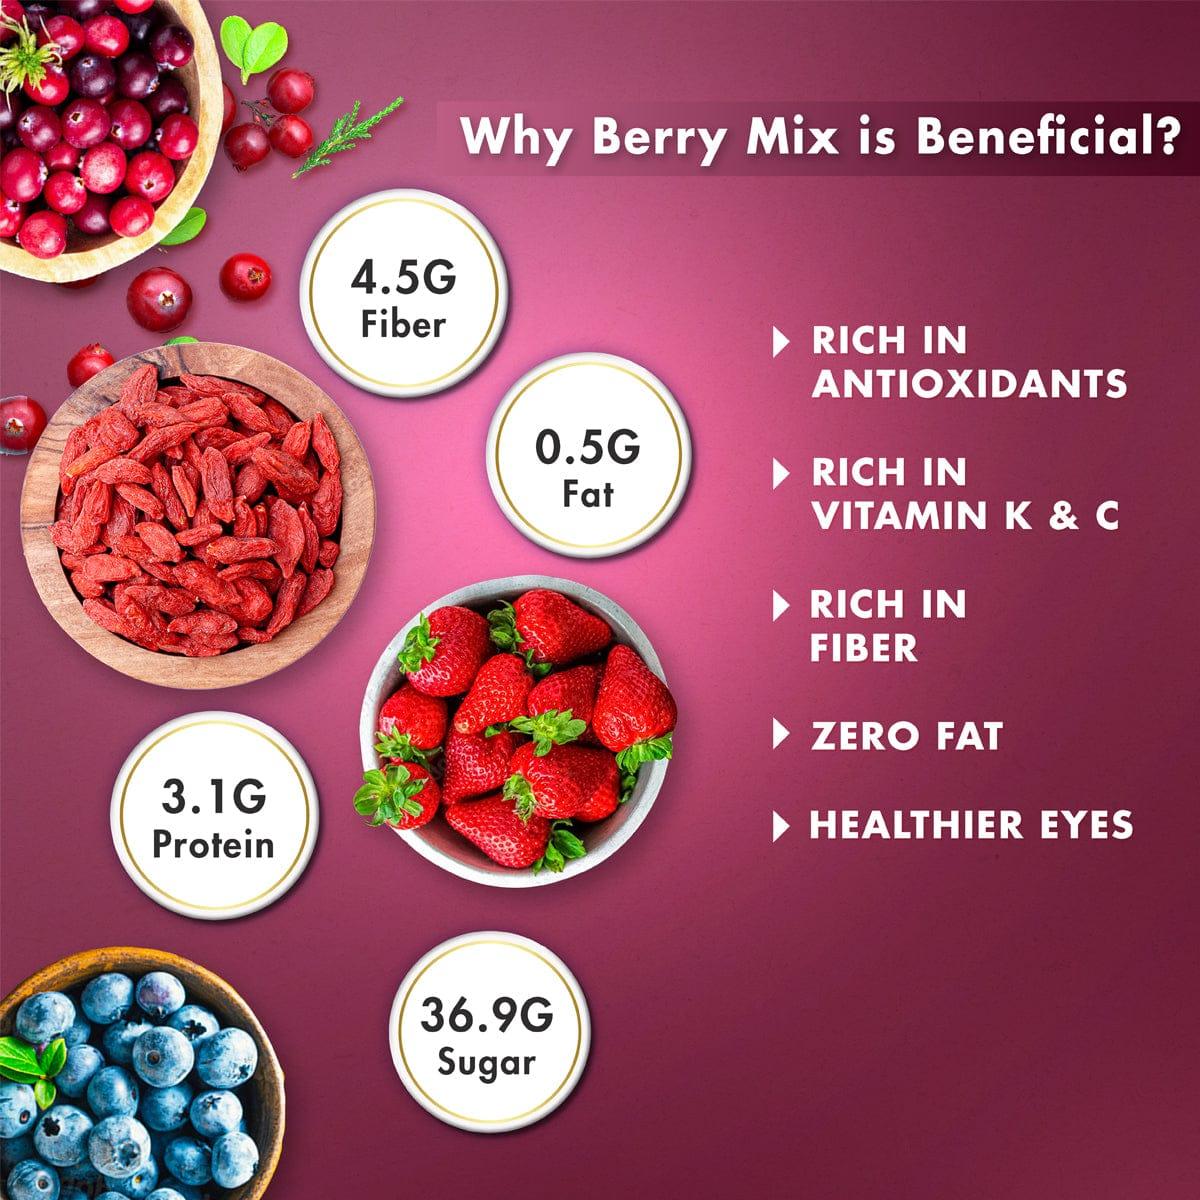 Why berry mix is beneficial?